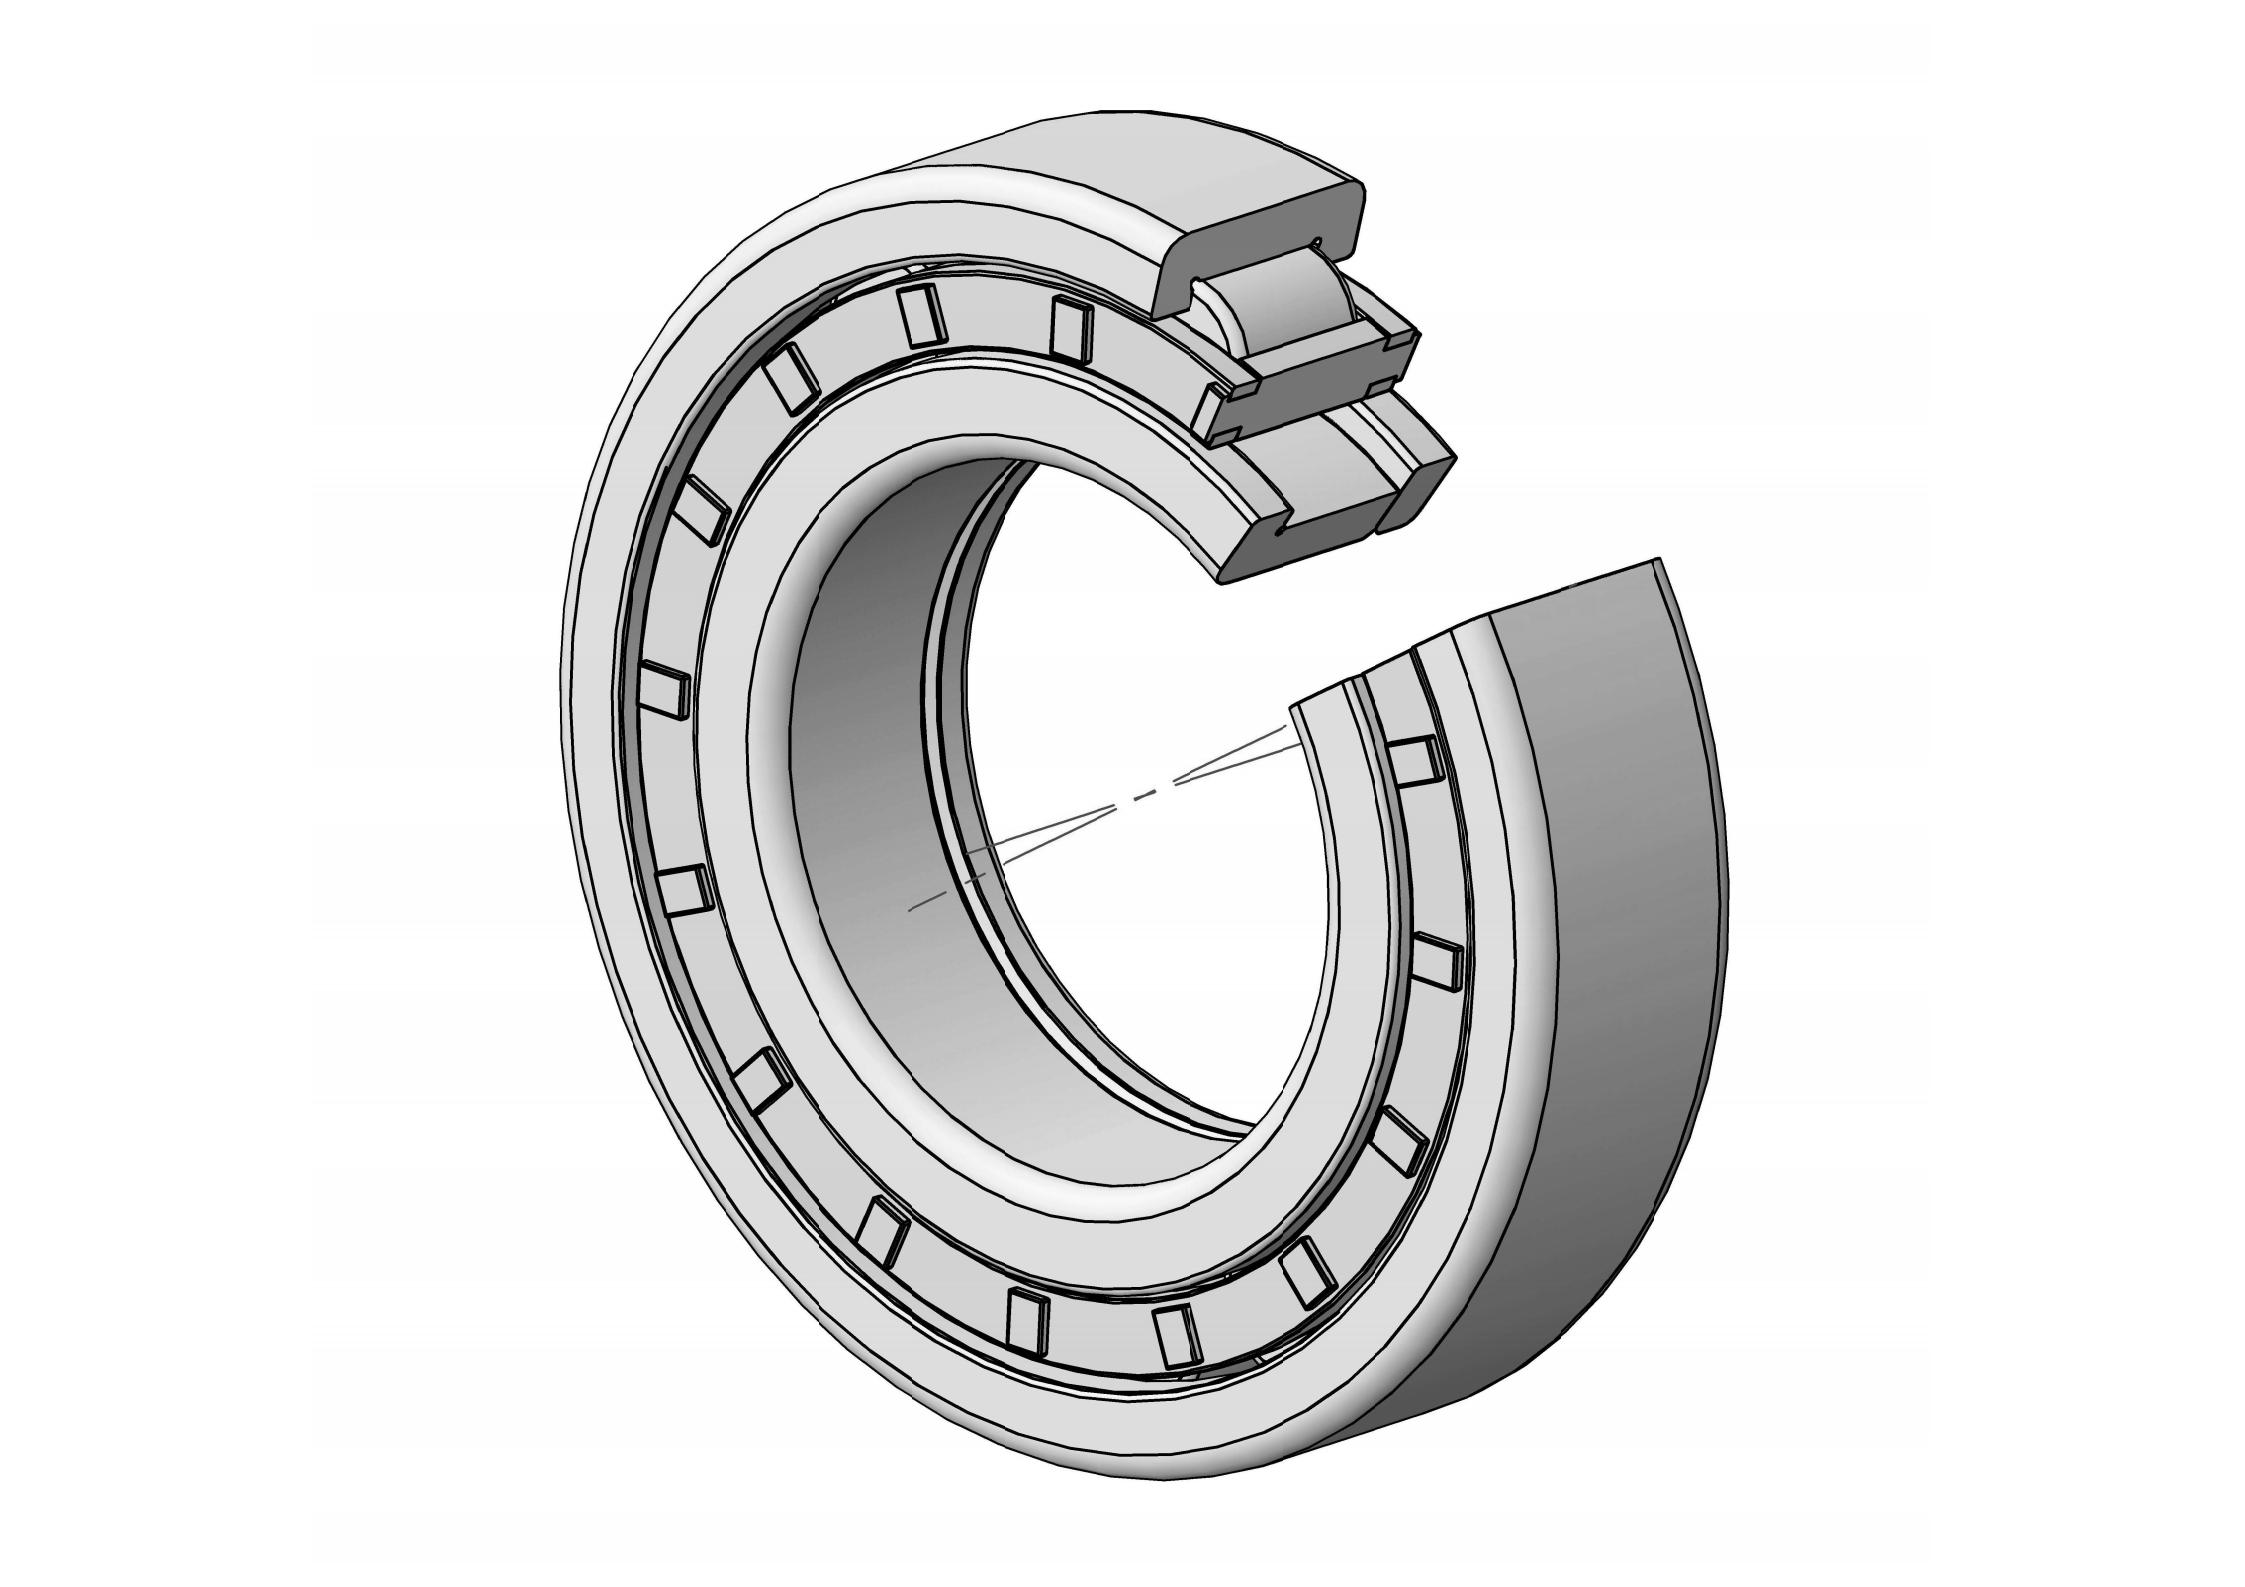 NUP309-E Single Row Cylindrical roller bearing 